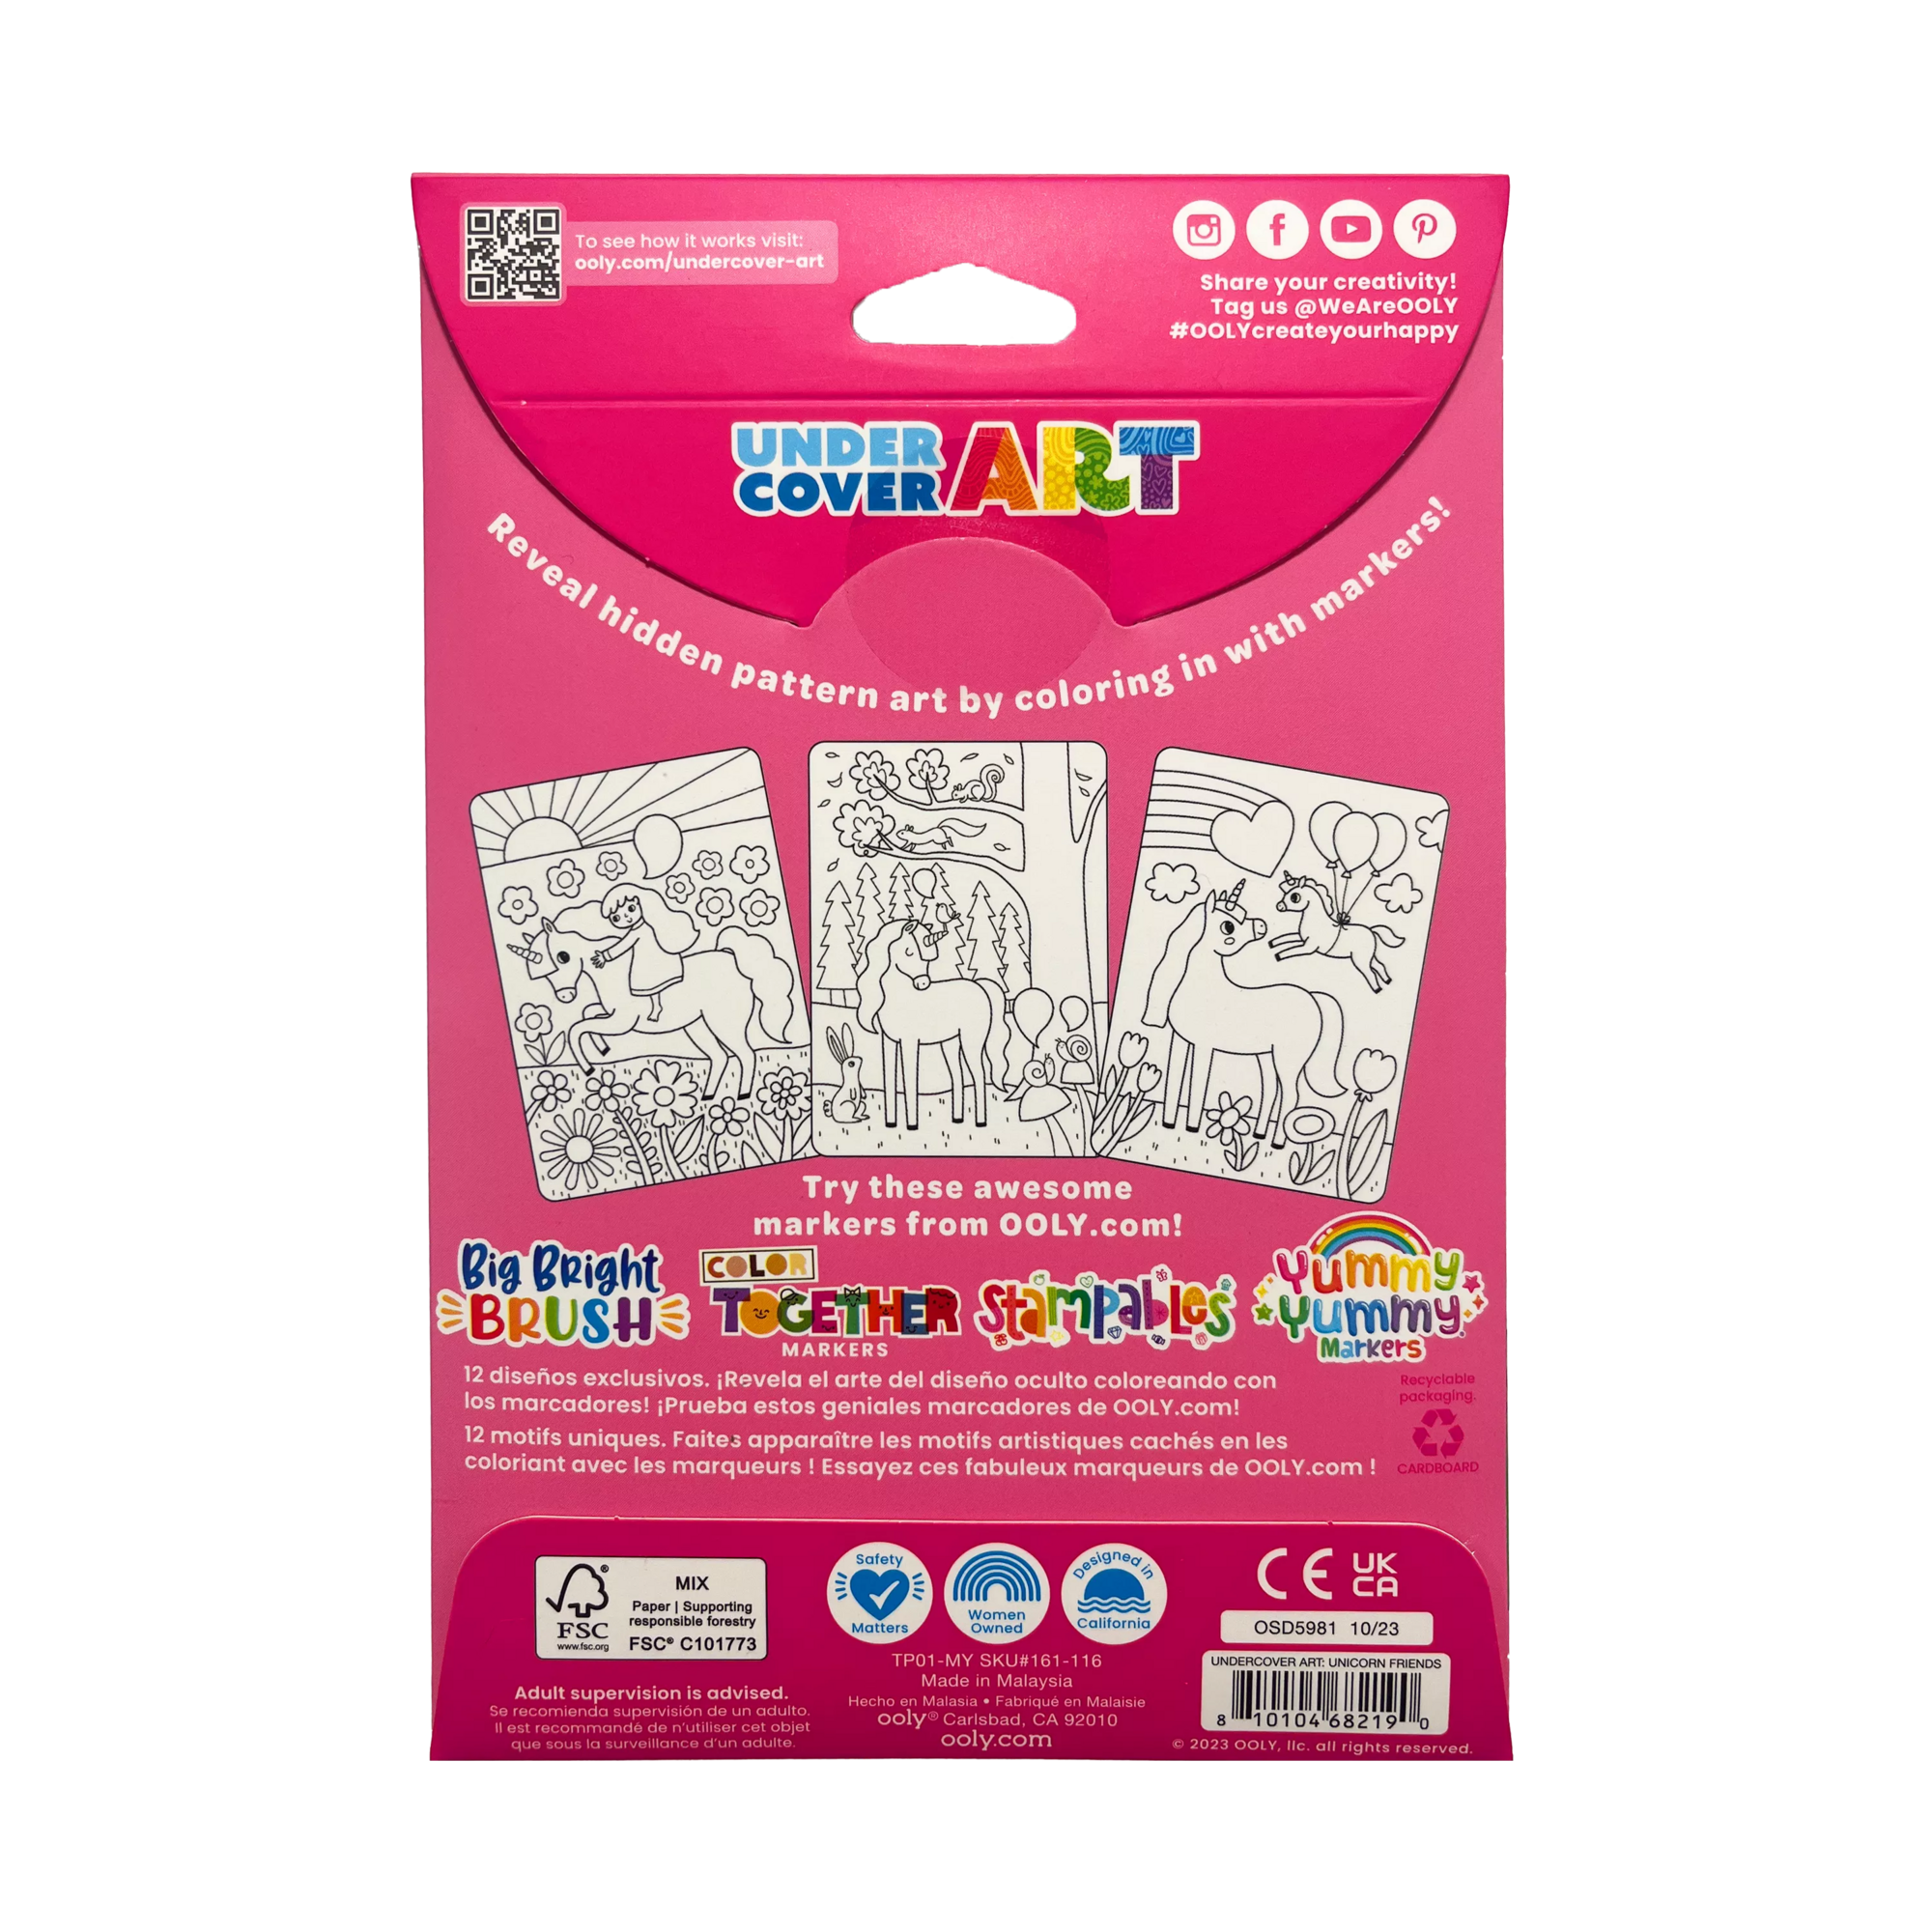 OOLY Undercover Art Hidden Pattern Coloring Activity Art Cards - Unicorn Friends back of packaging